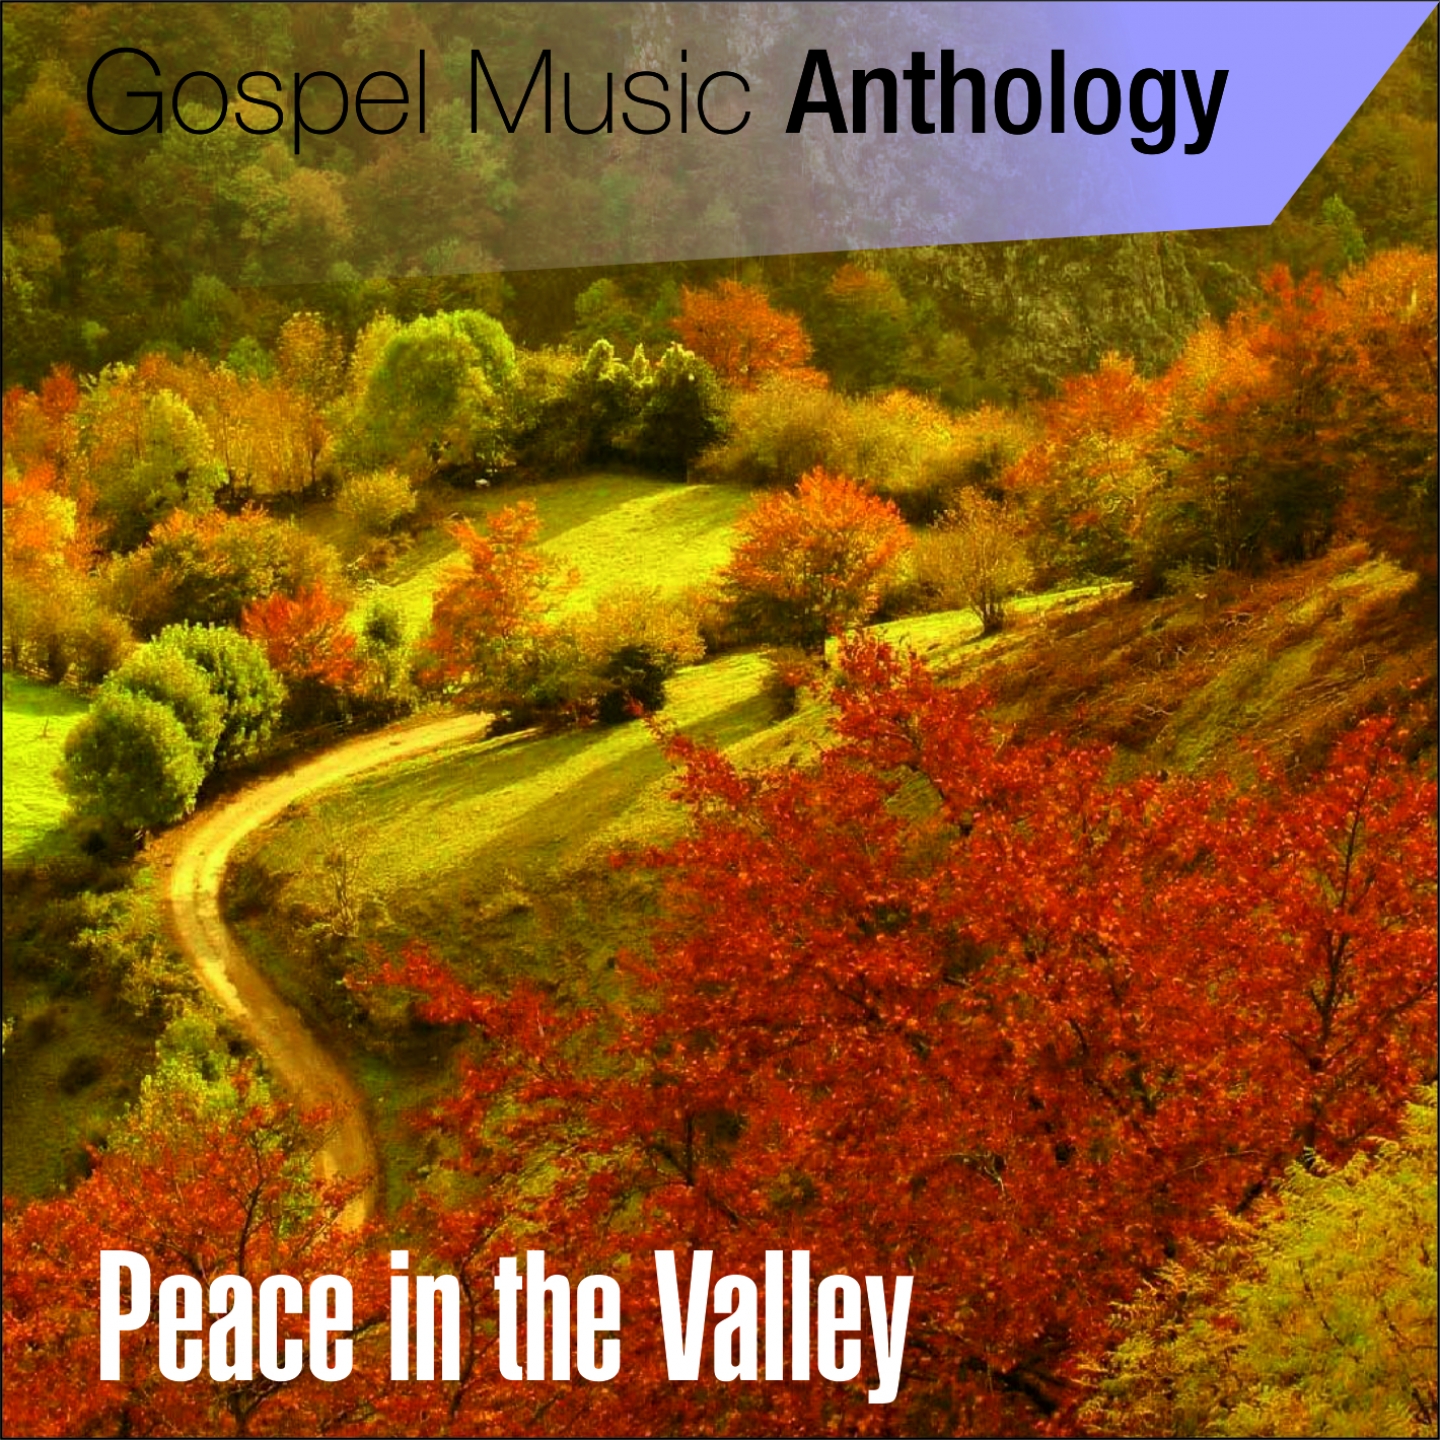 Gospel Music Anthology (Peace in the Valley)